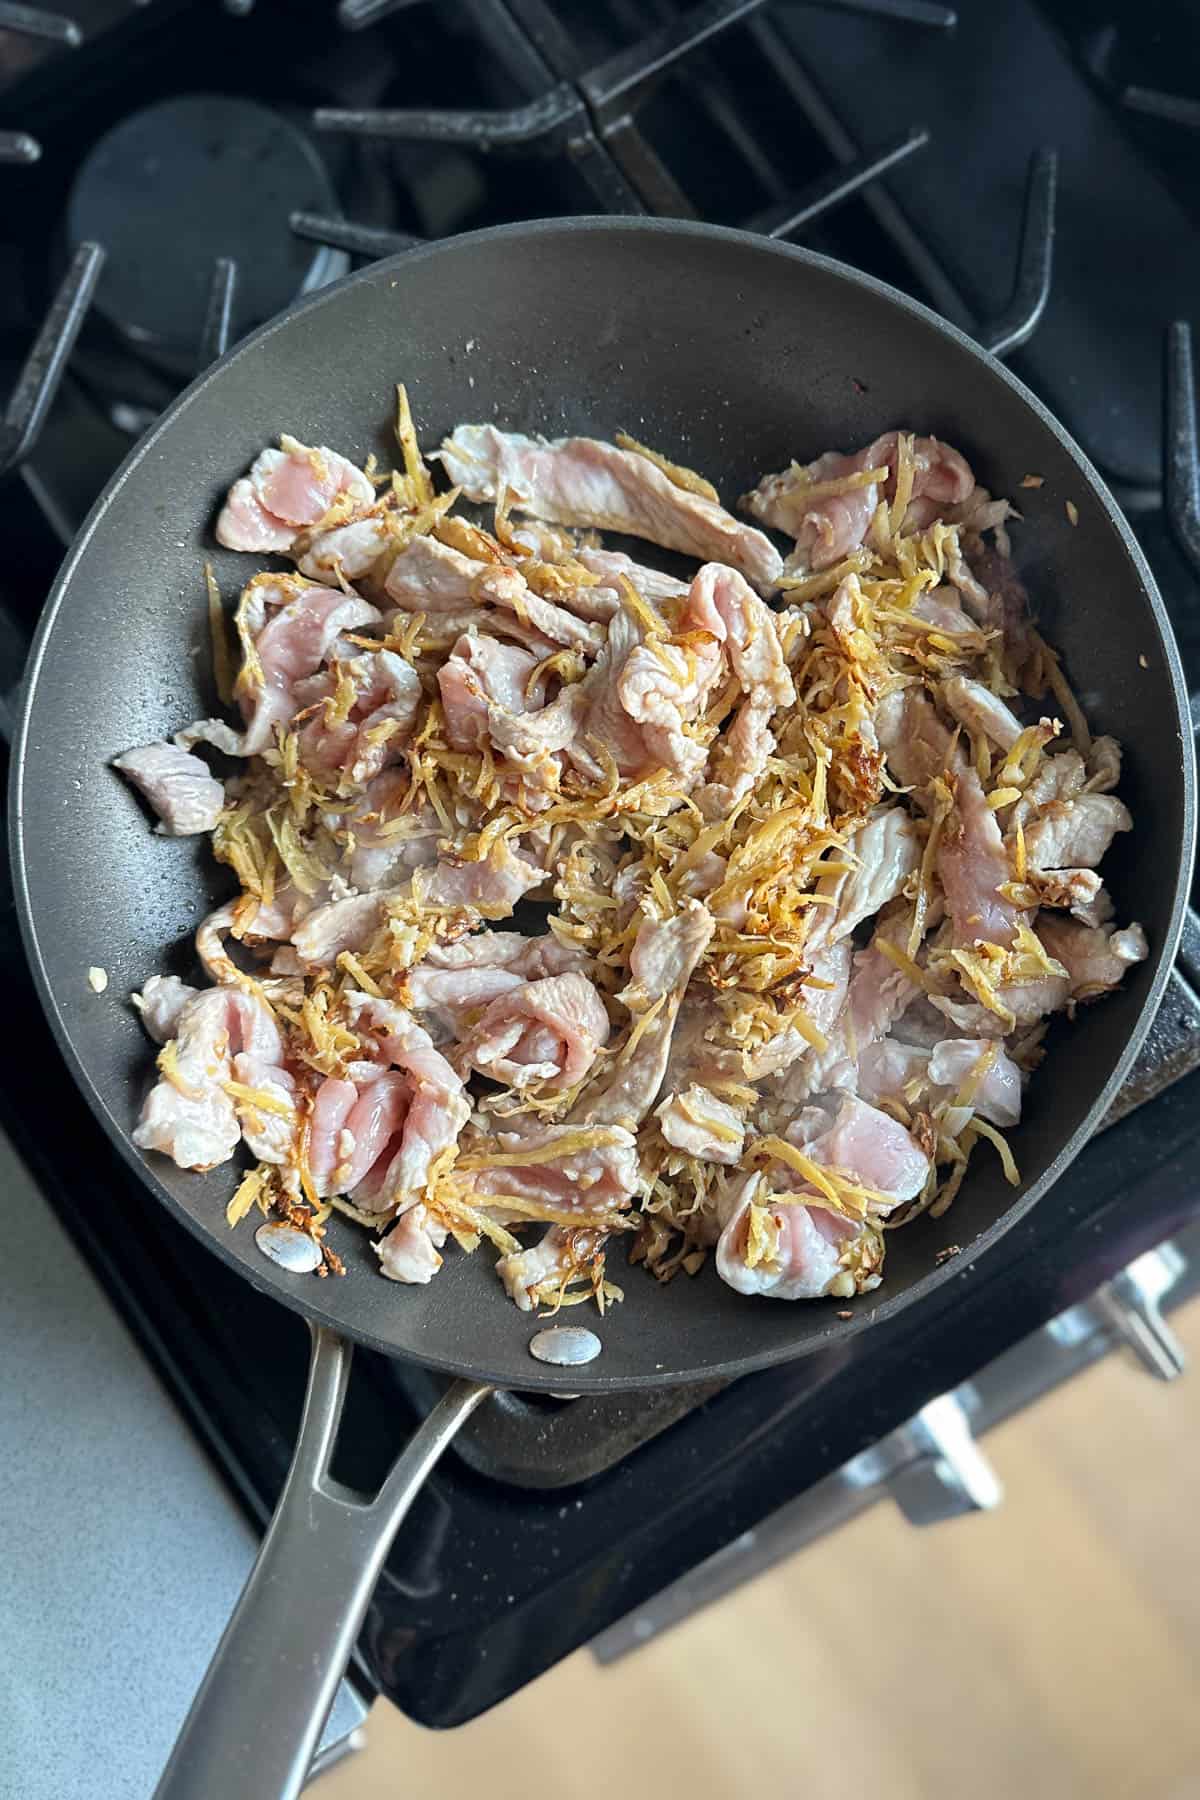 Stir frying the sliced pork with ginger and garlic in a pan.